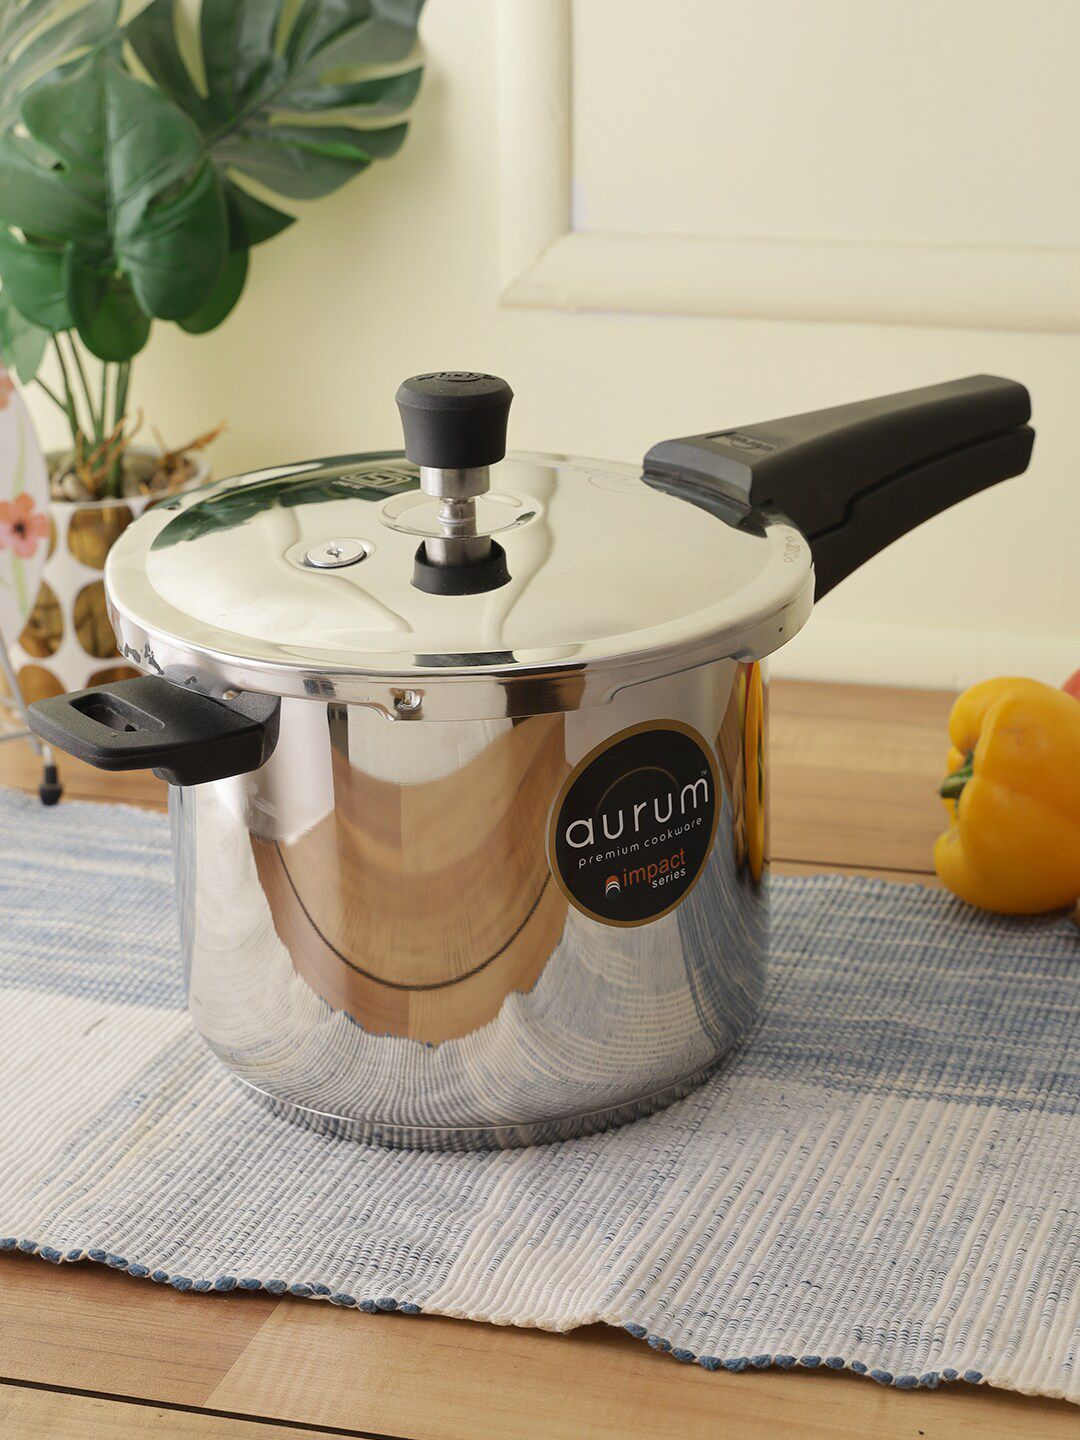 AURUM Silver-Toned Induction Base 5 L Pressure Cooker Price in India